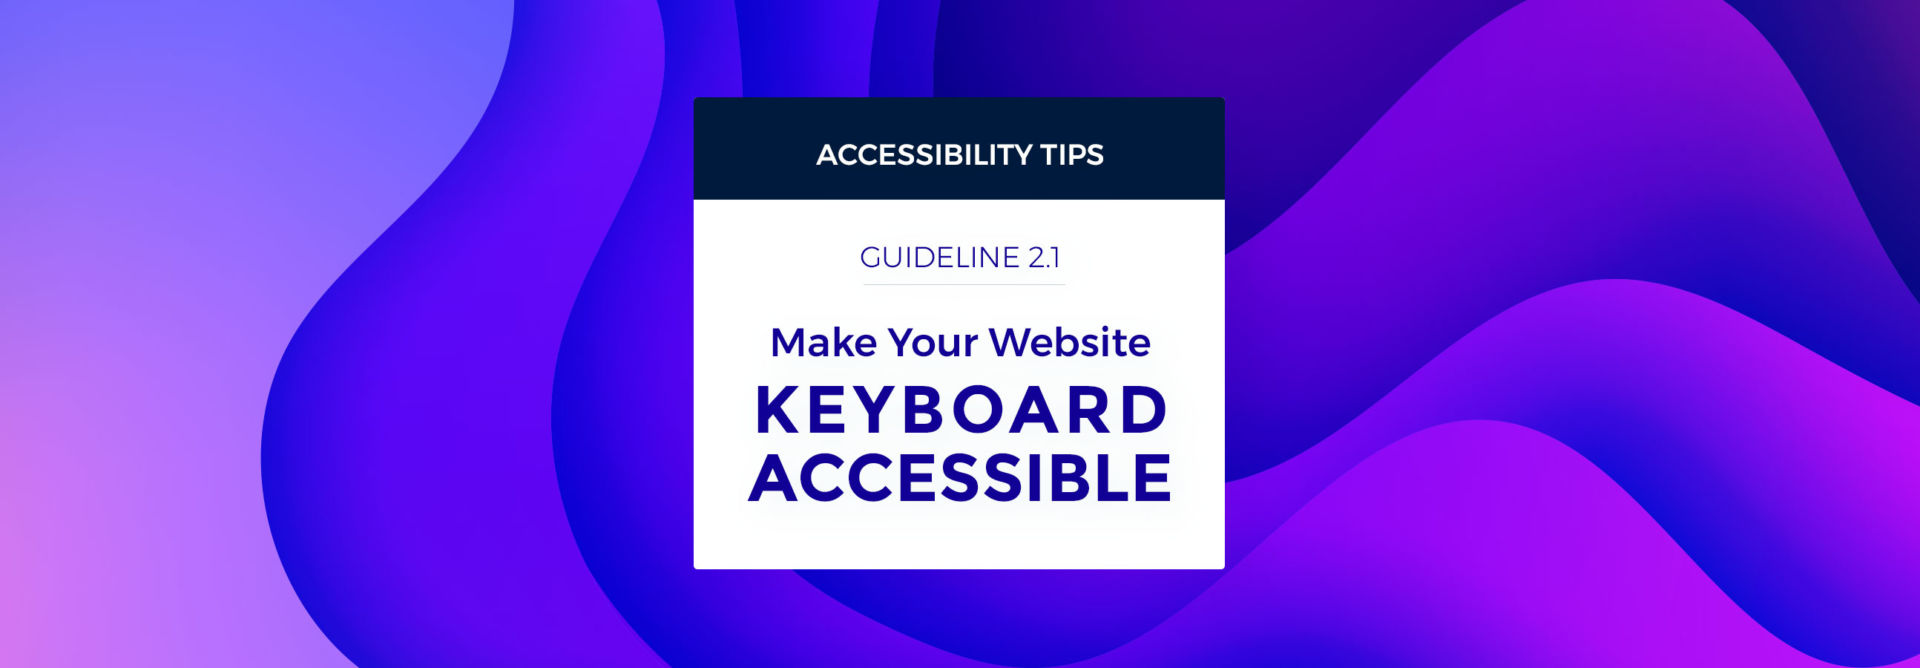 Accessibility Tip: Make Your Website Keyboard Accessible